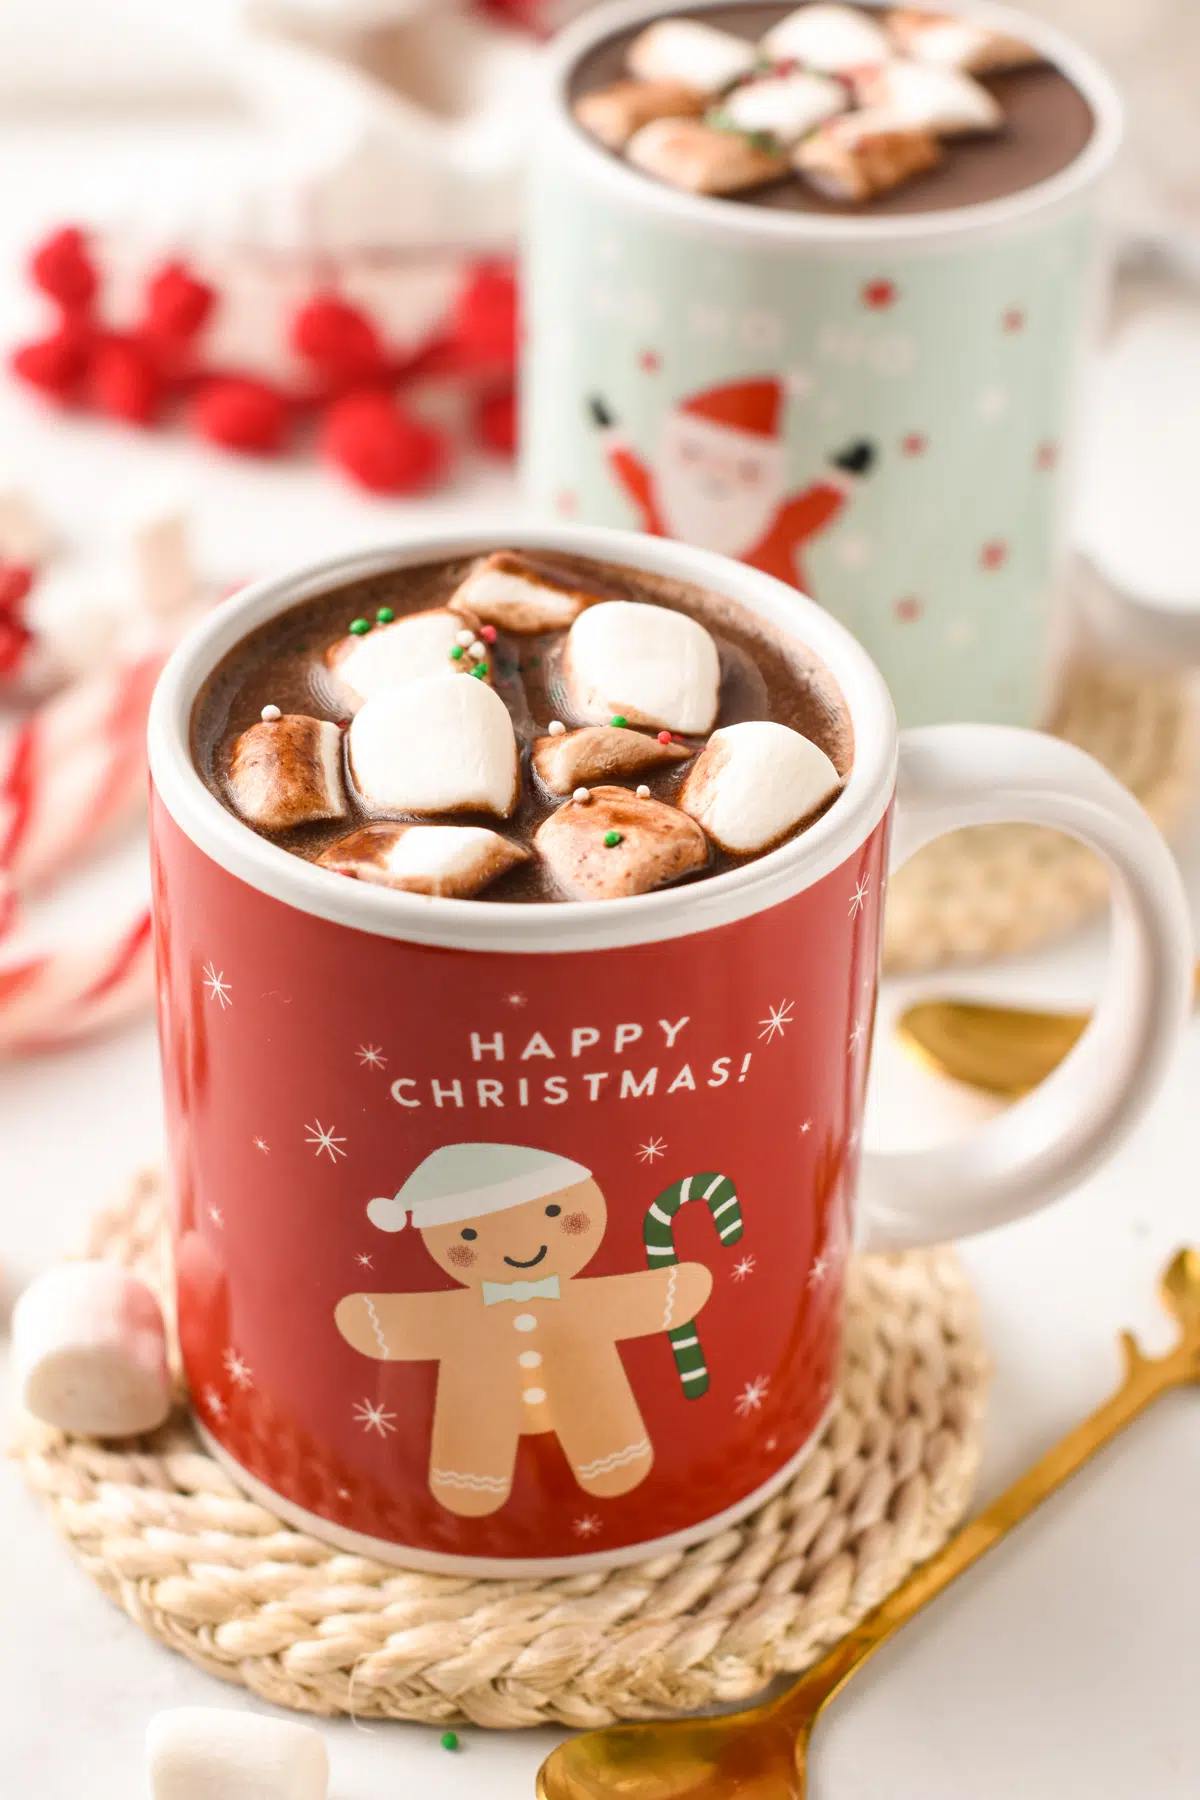 Homemade Hot Chocolate with Chocolate Chips perfect as a kid hot chocolate recipe healthy easy gluten free vegan dairy free busy little kiddies (2)